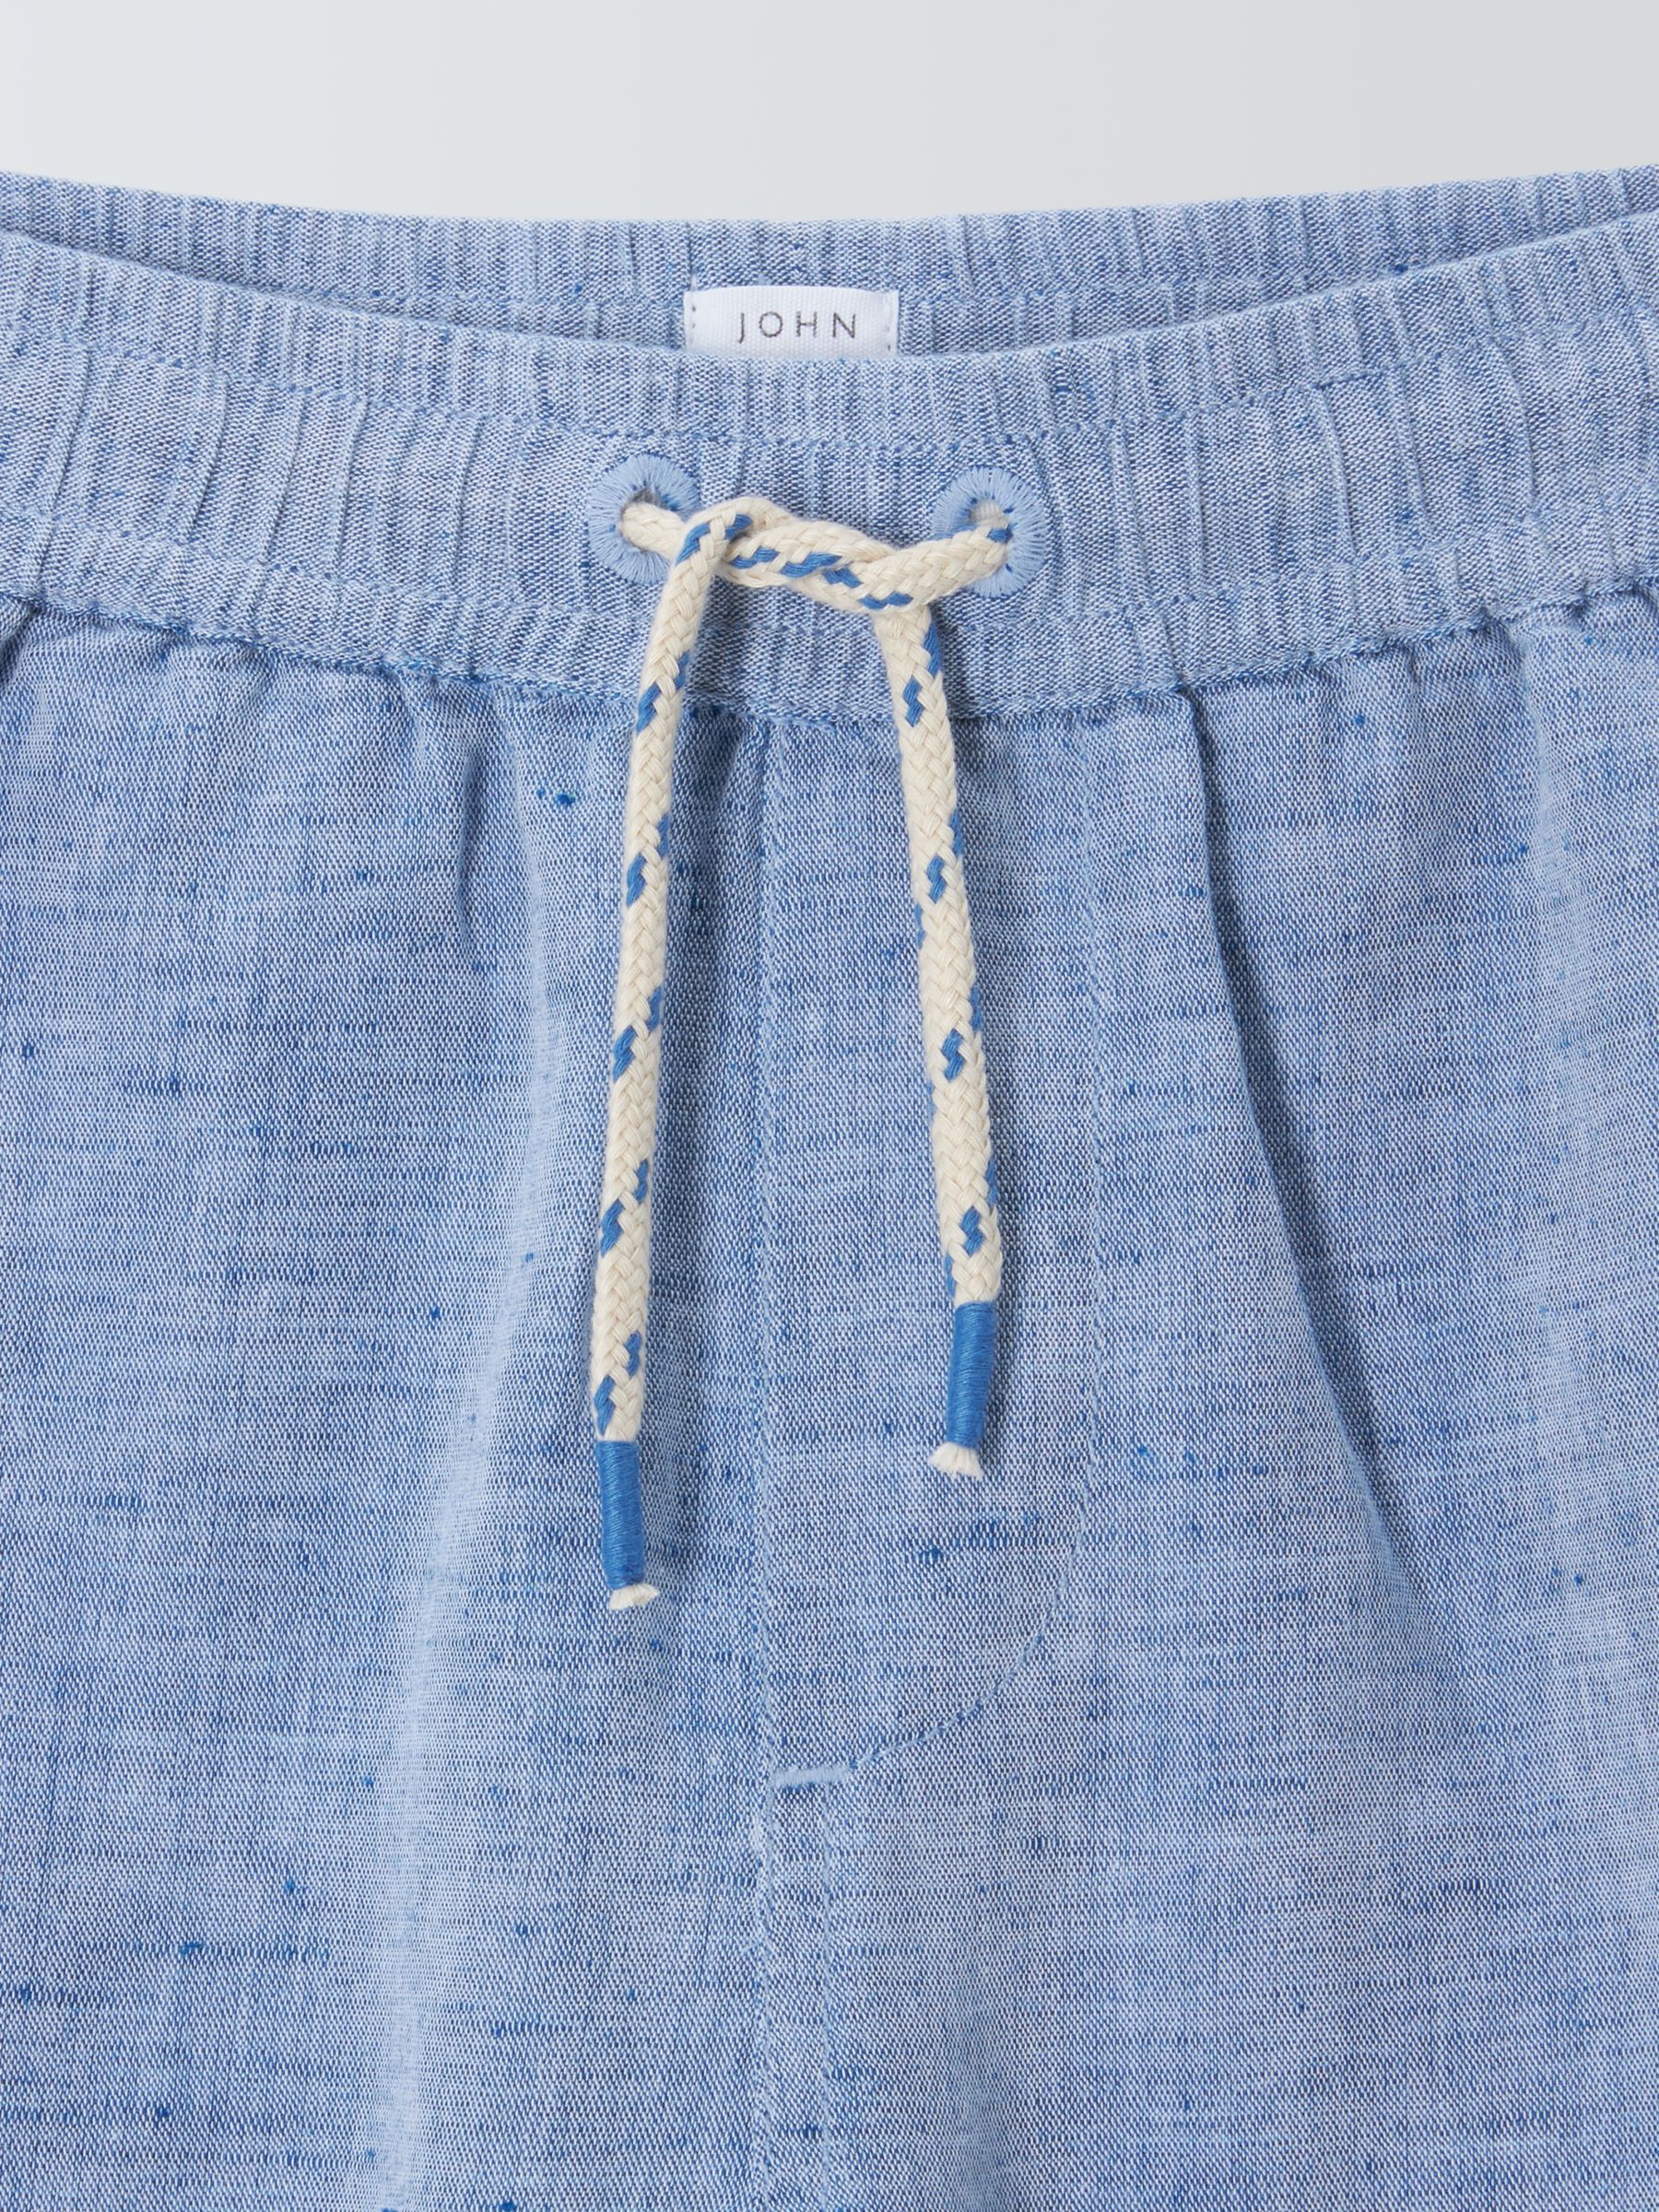 John Lewis Kids' Chambray Pull On Linen Blend Trousers, Blue, 4 years